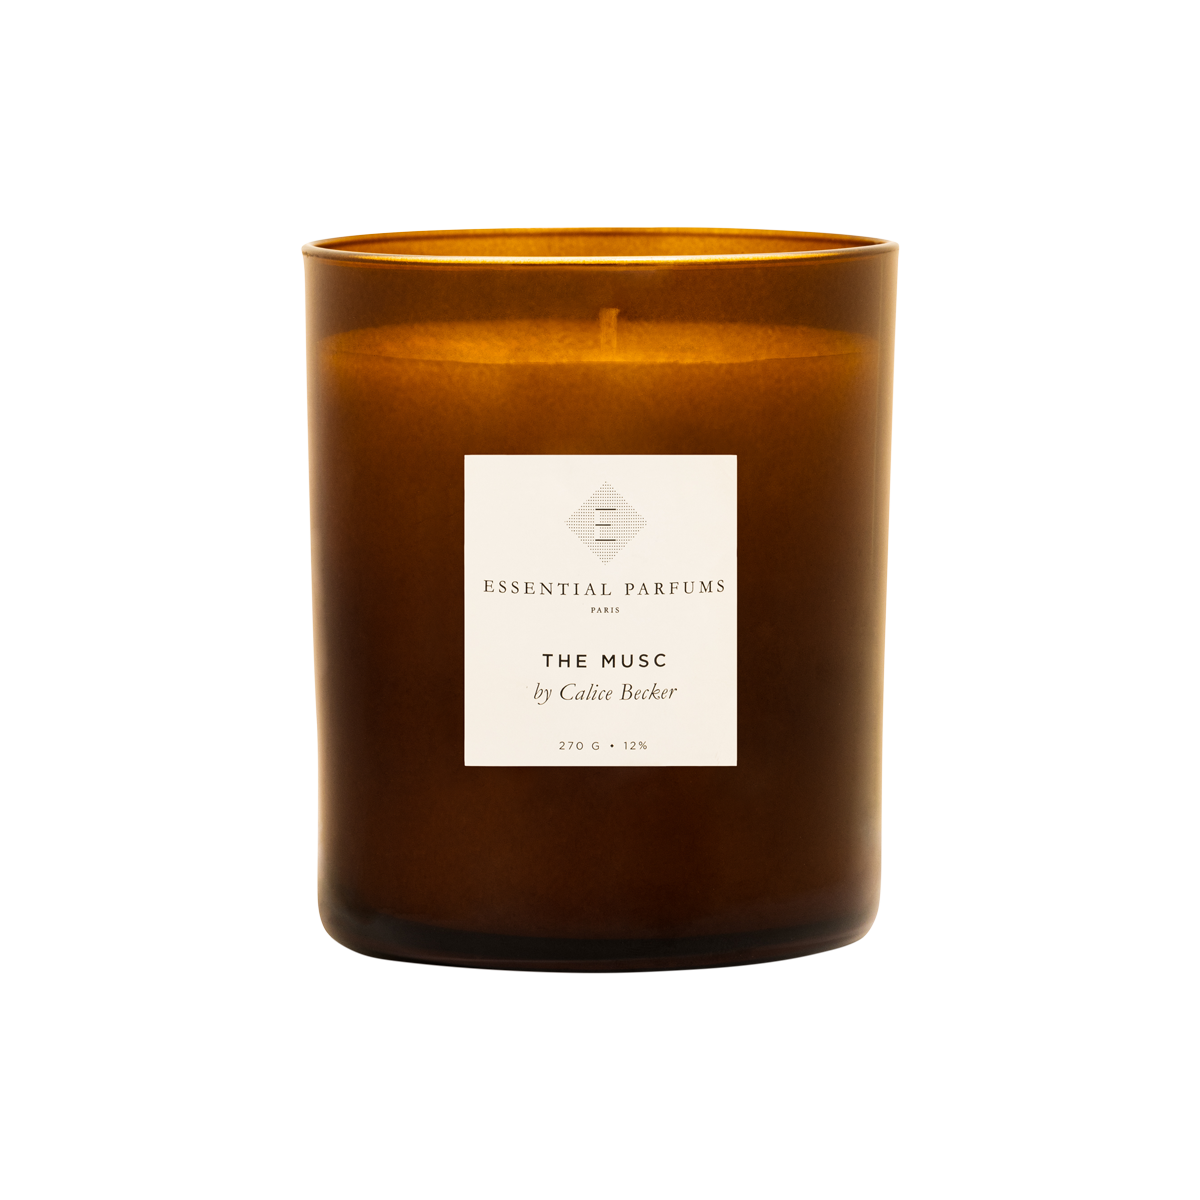 Essential Parfums - The Musc Candle